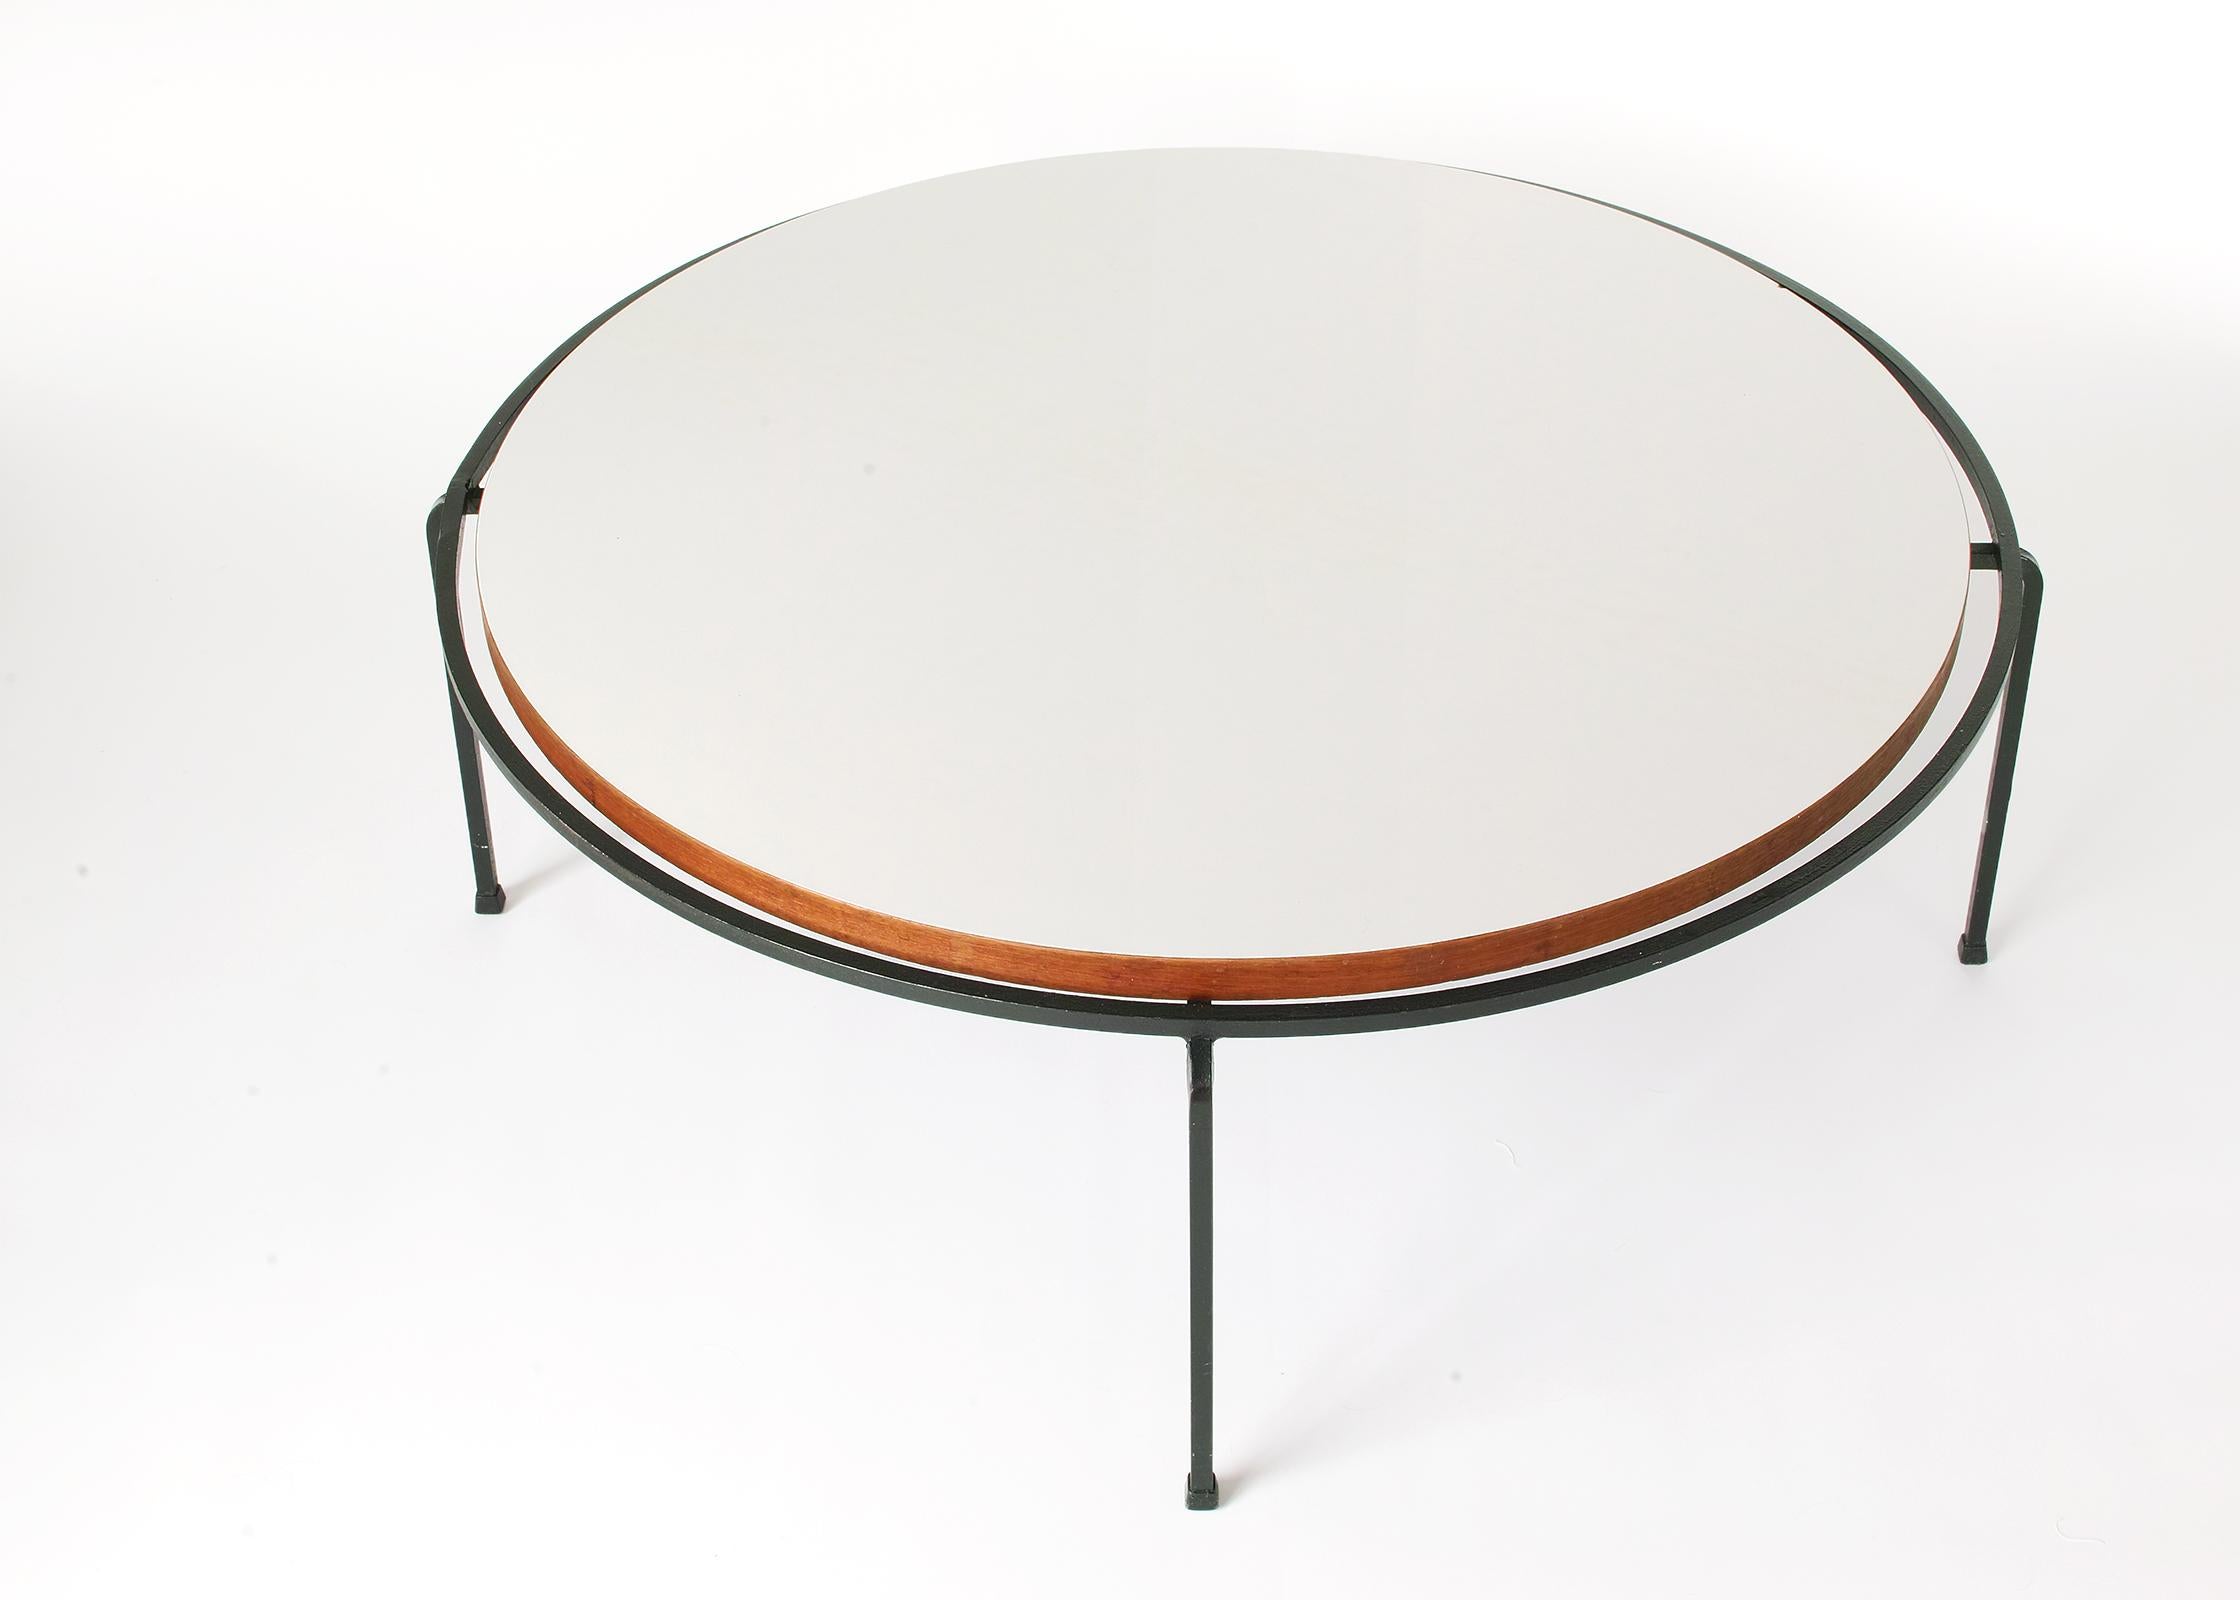 Circular coffee table with original inset white laminate top and square tube steel base with black painted finish. This is a rarely seen design by Allan Gould in the larger diameter size. The 36